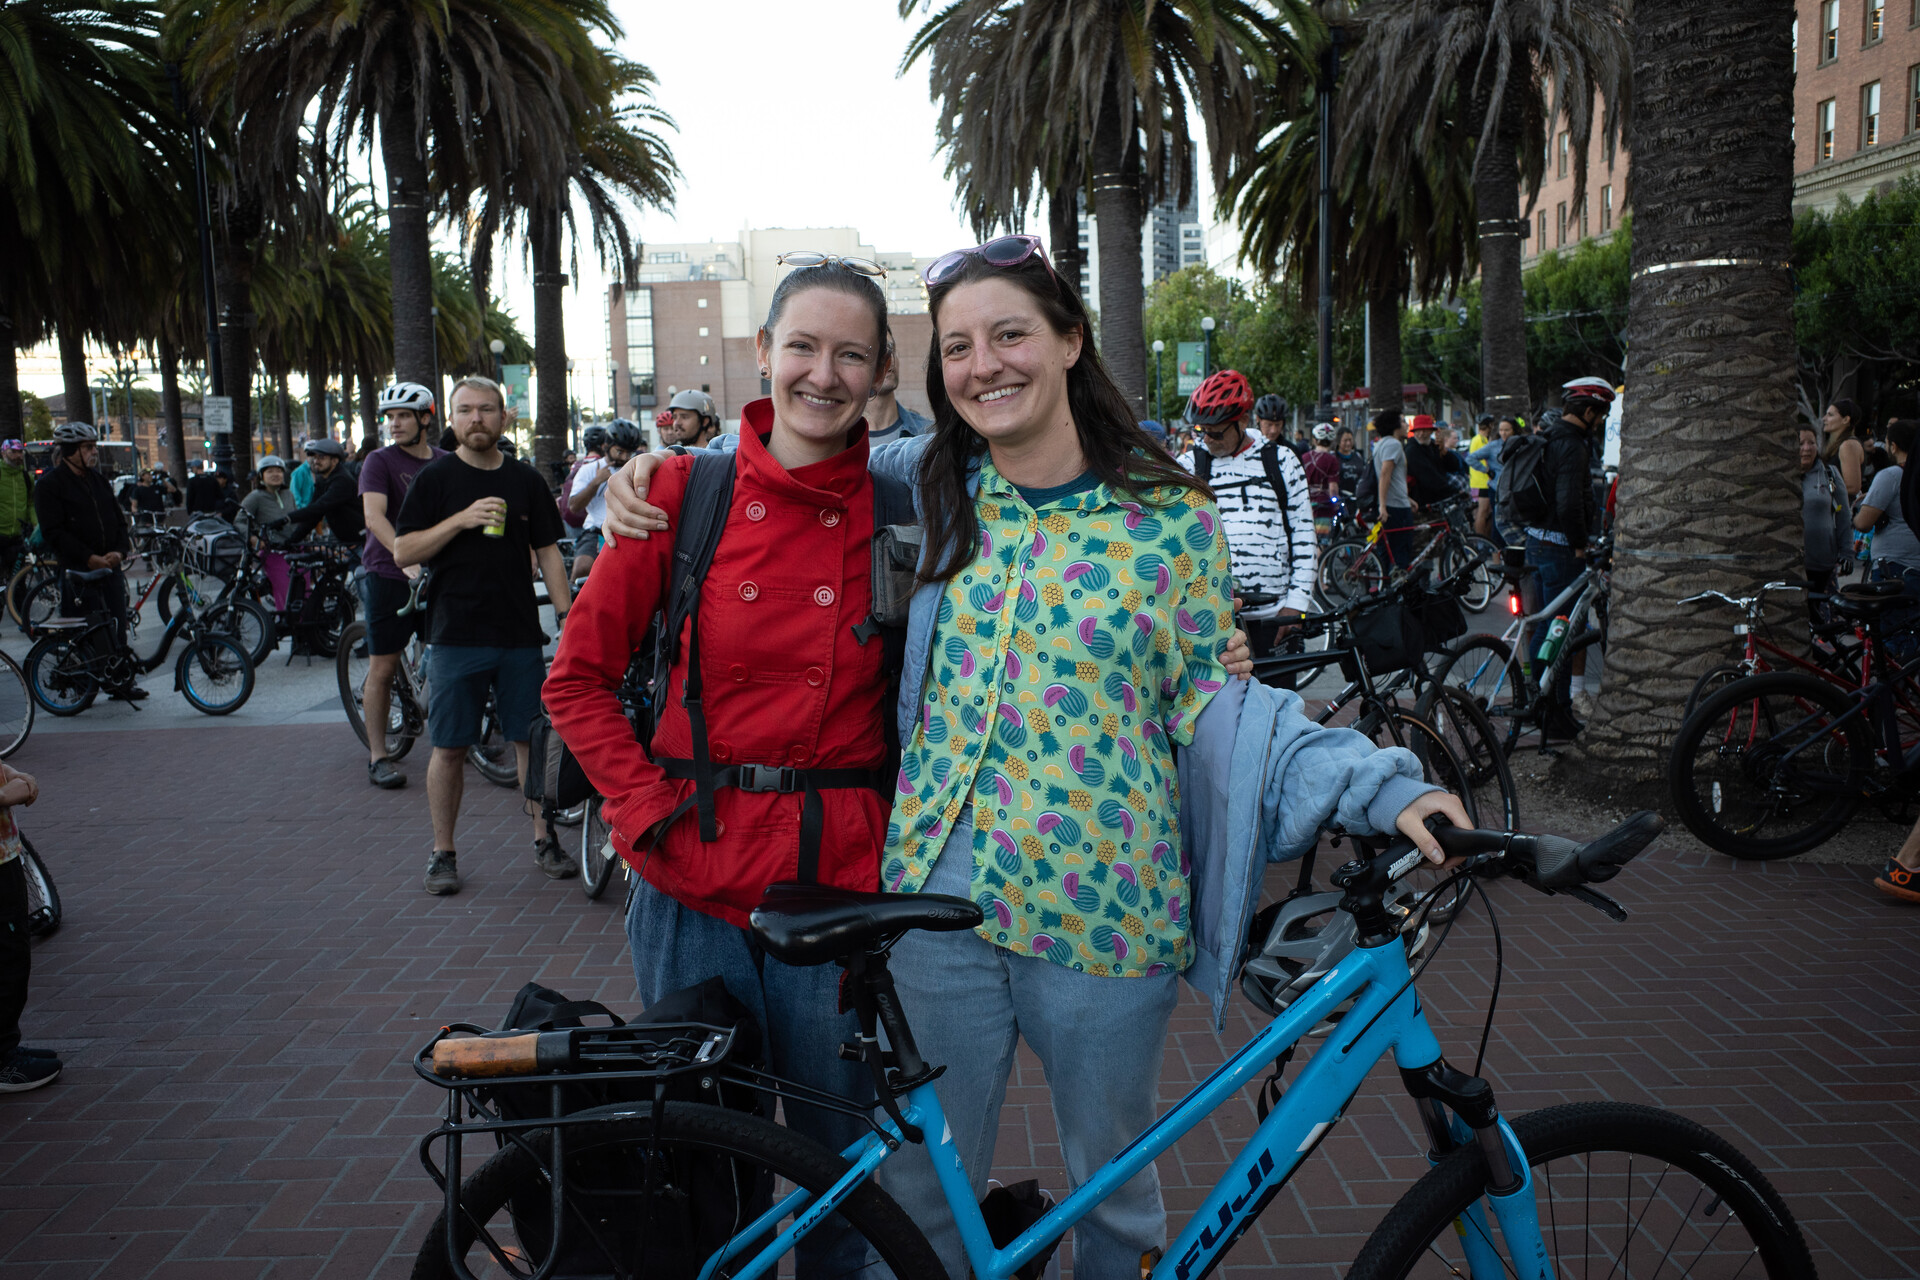 Two women in their 30s pose for the camera in front of a blue bike, one woman is wearing a red jacket, the other a green one with patterns, both are smiling.